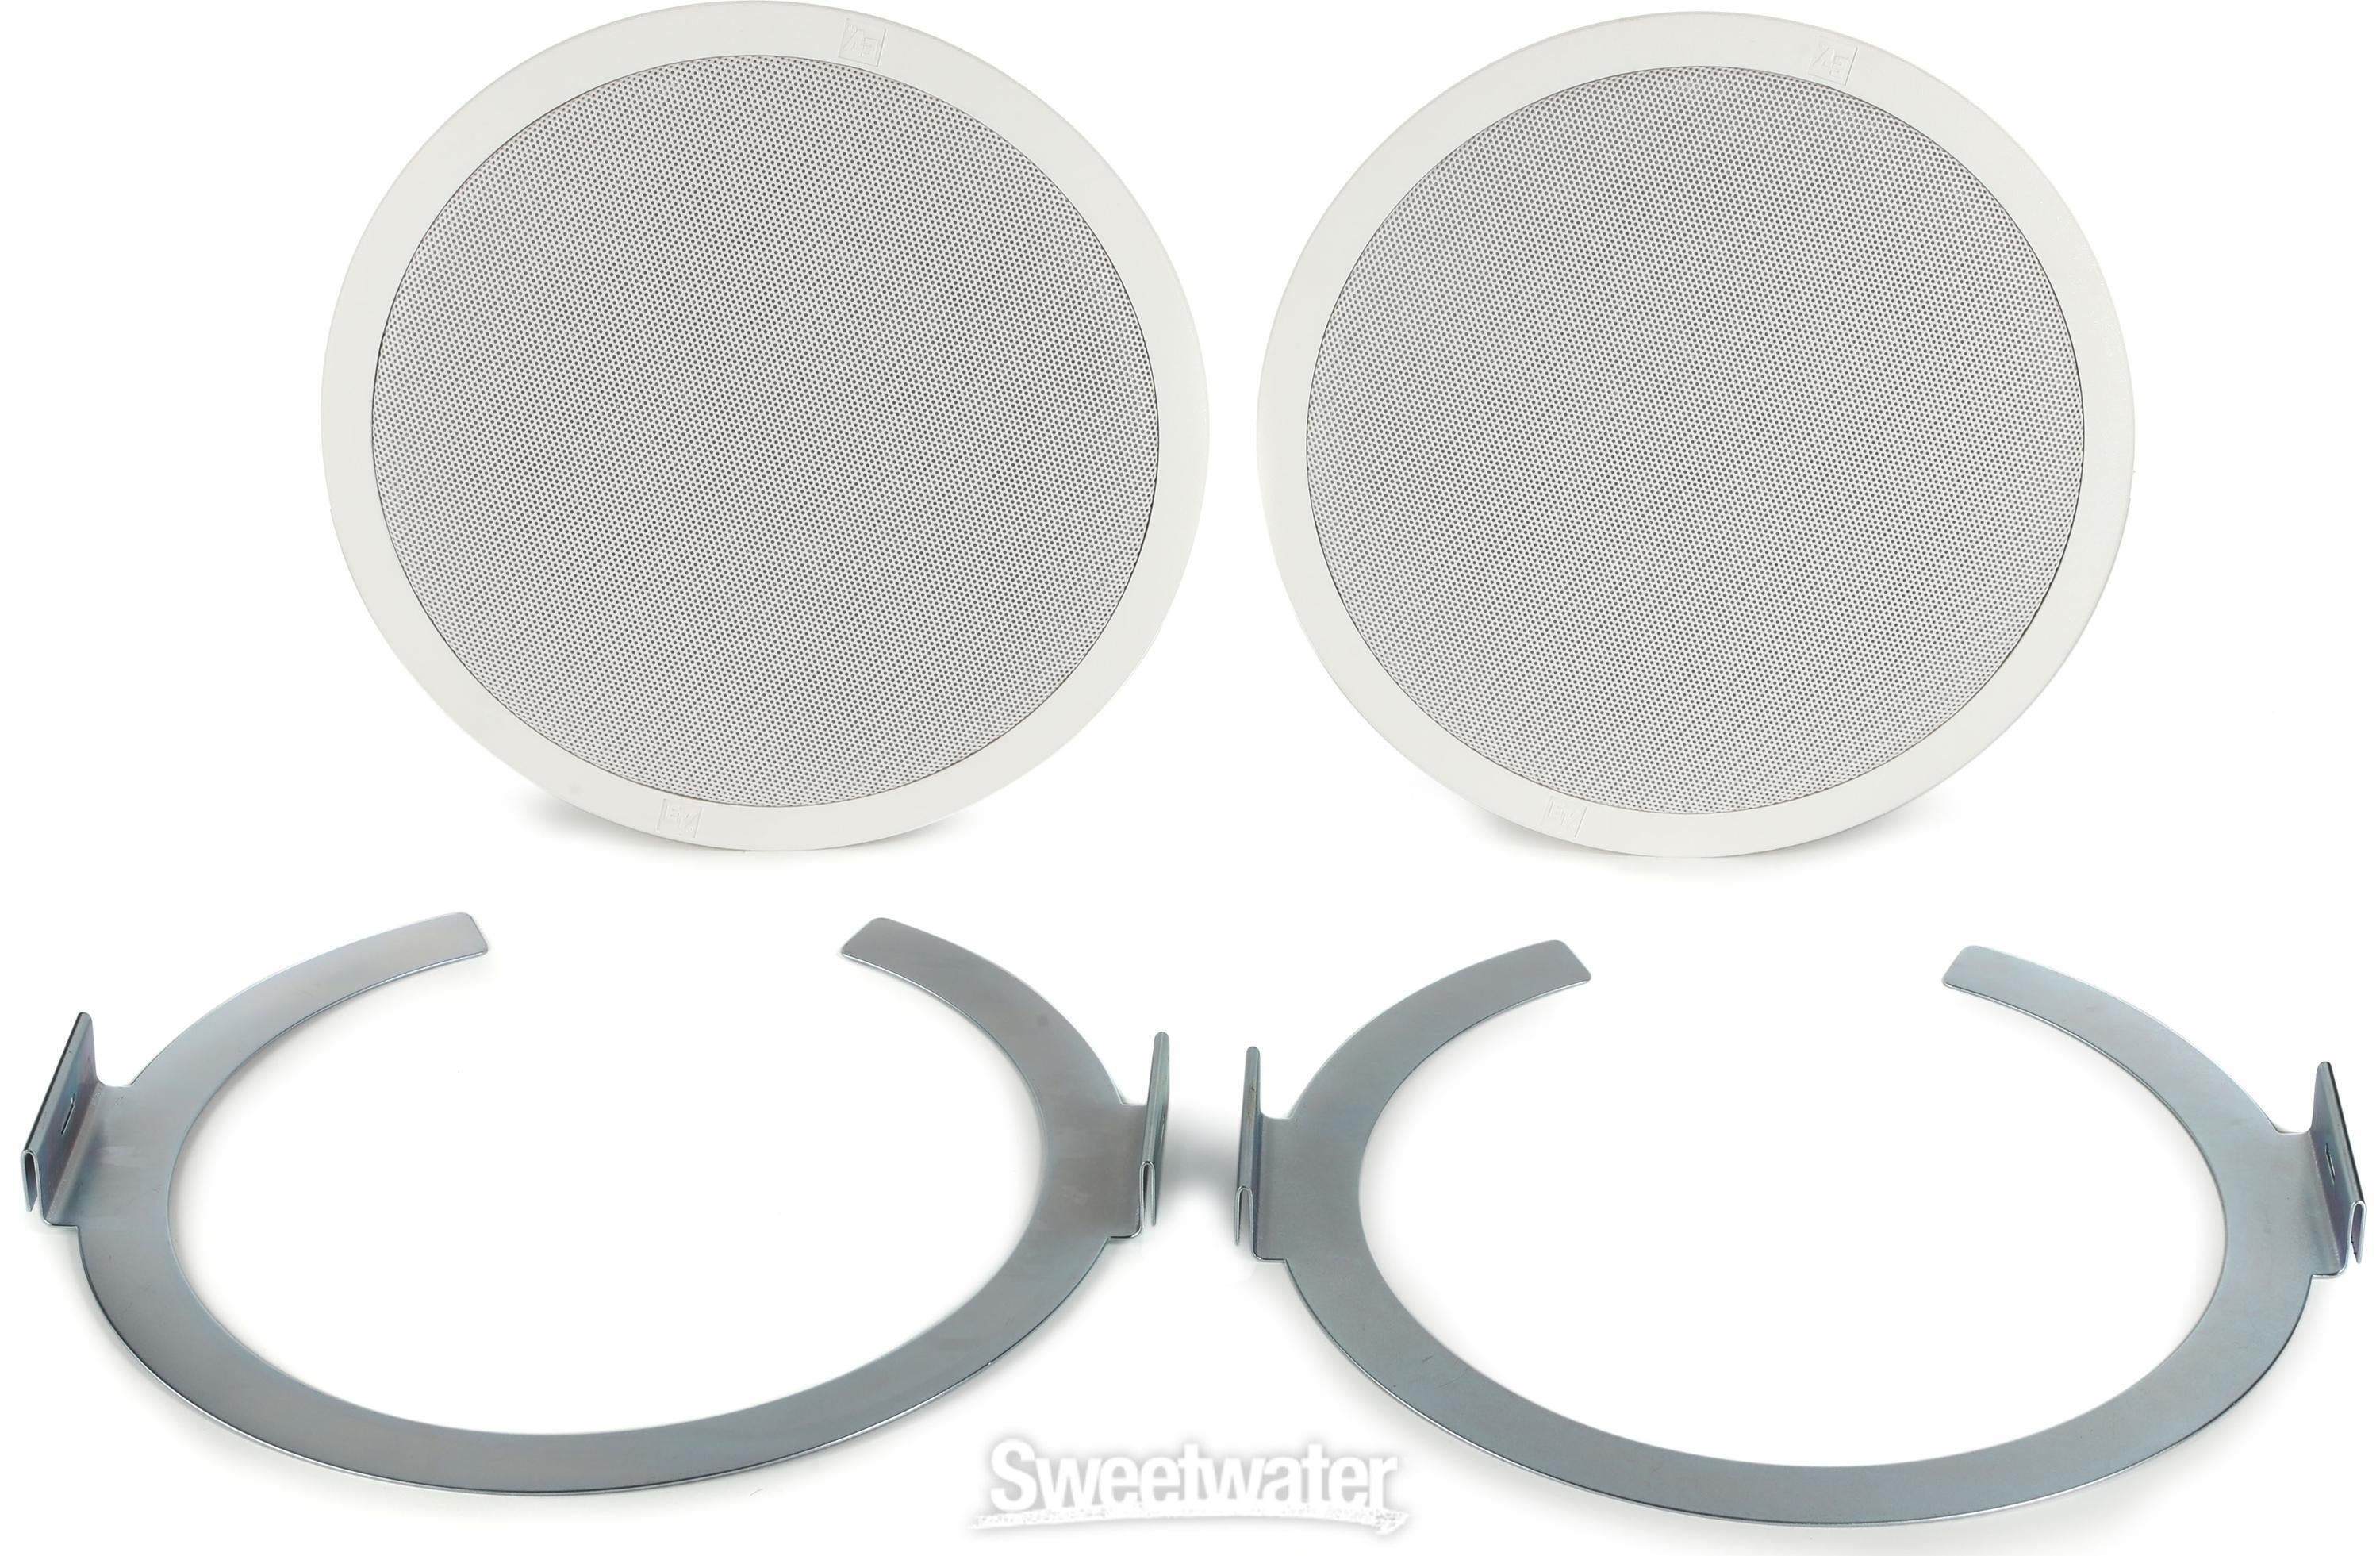 Electro-Voice EVID C8.2LP 8-inch Low-profile Coaxial Ceiling Install  Speaker (Pair) - White